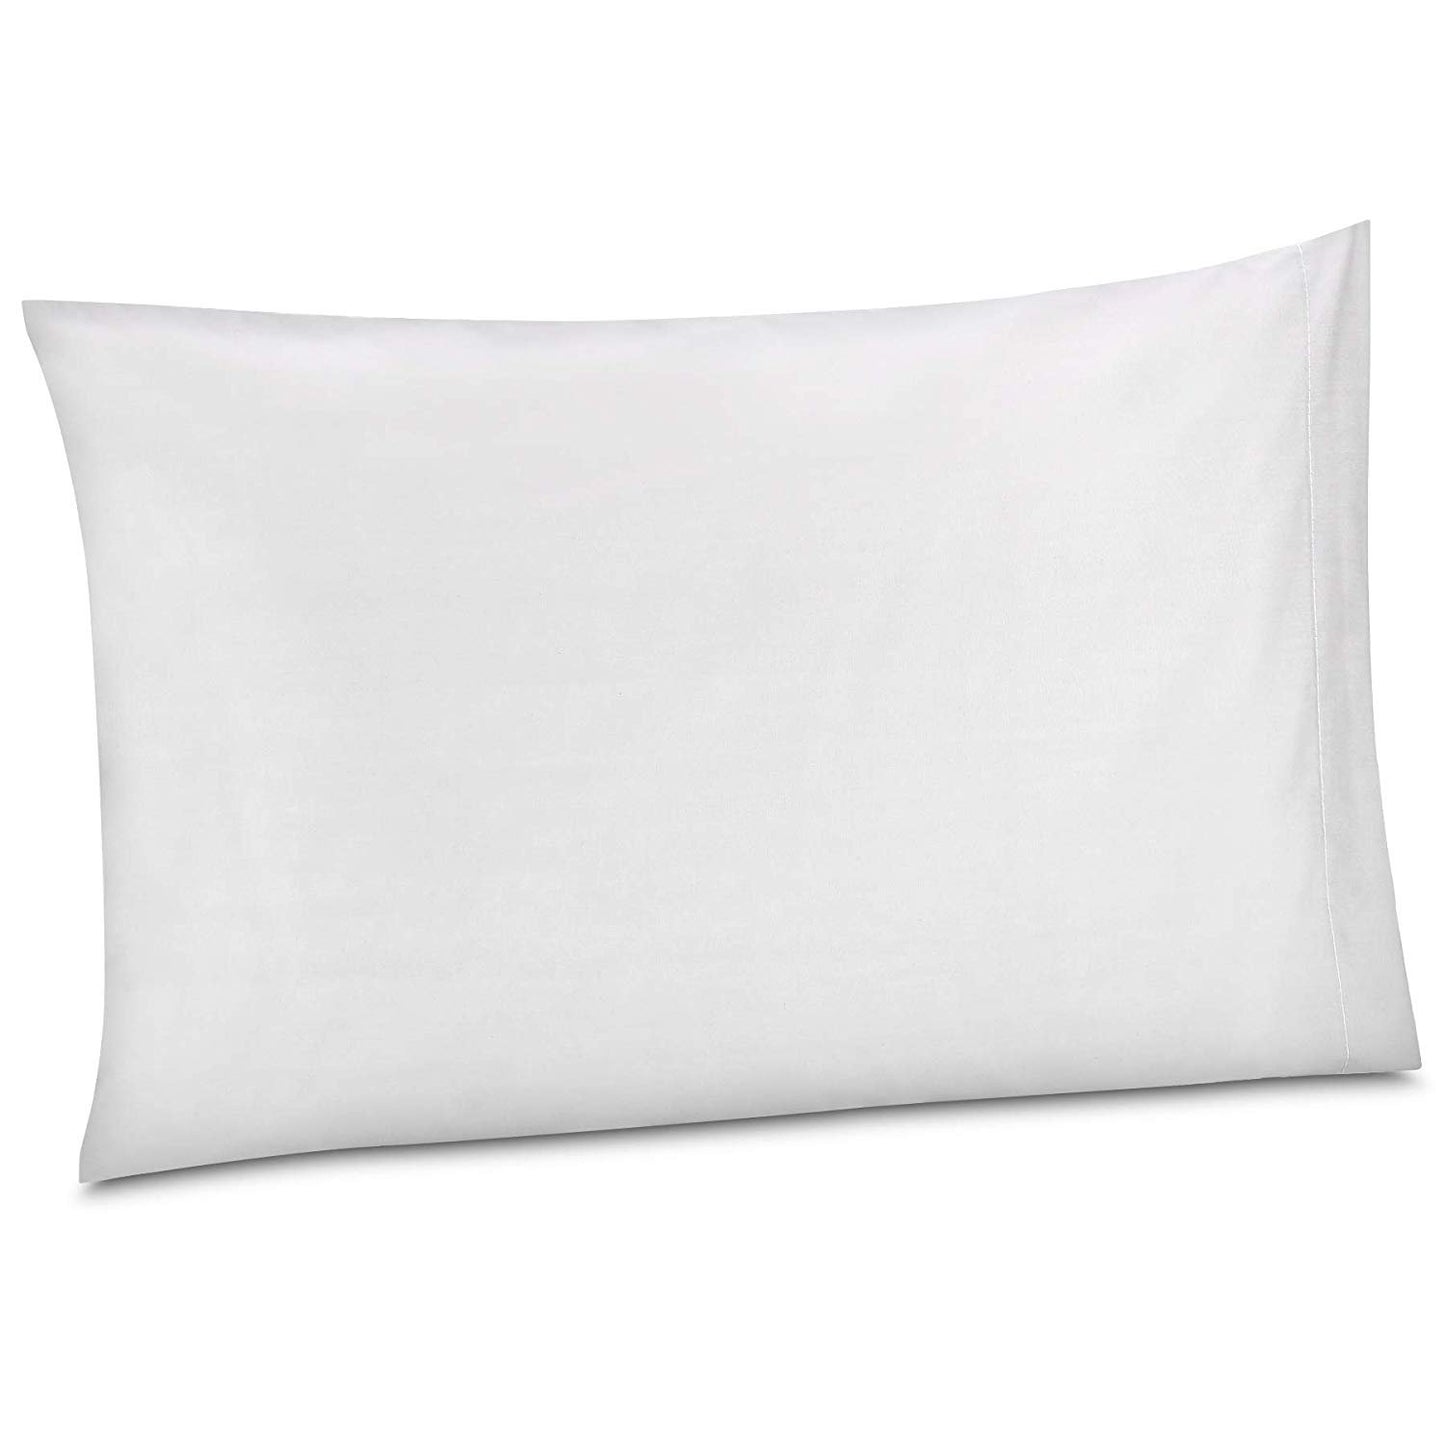 100% Cotton/Percale 210 Thread Count Pillow Cases Set of 2 Soft White Cotton Pillow Cover for Sleeping-Bedroom Pillowcases